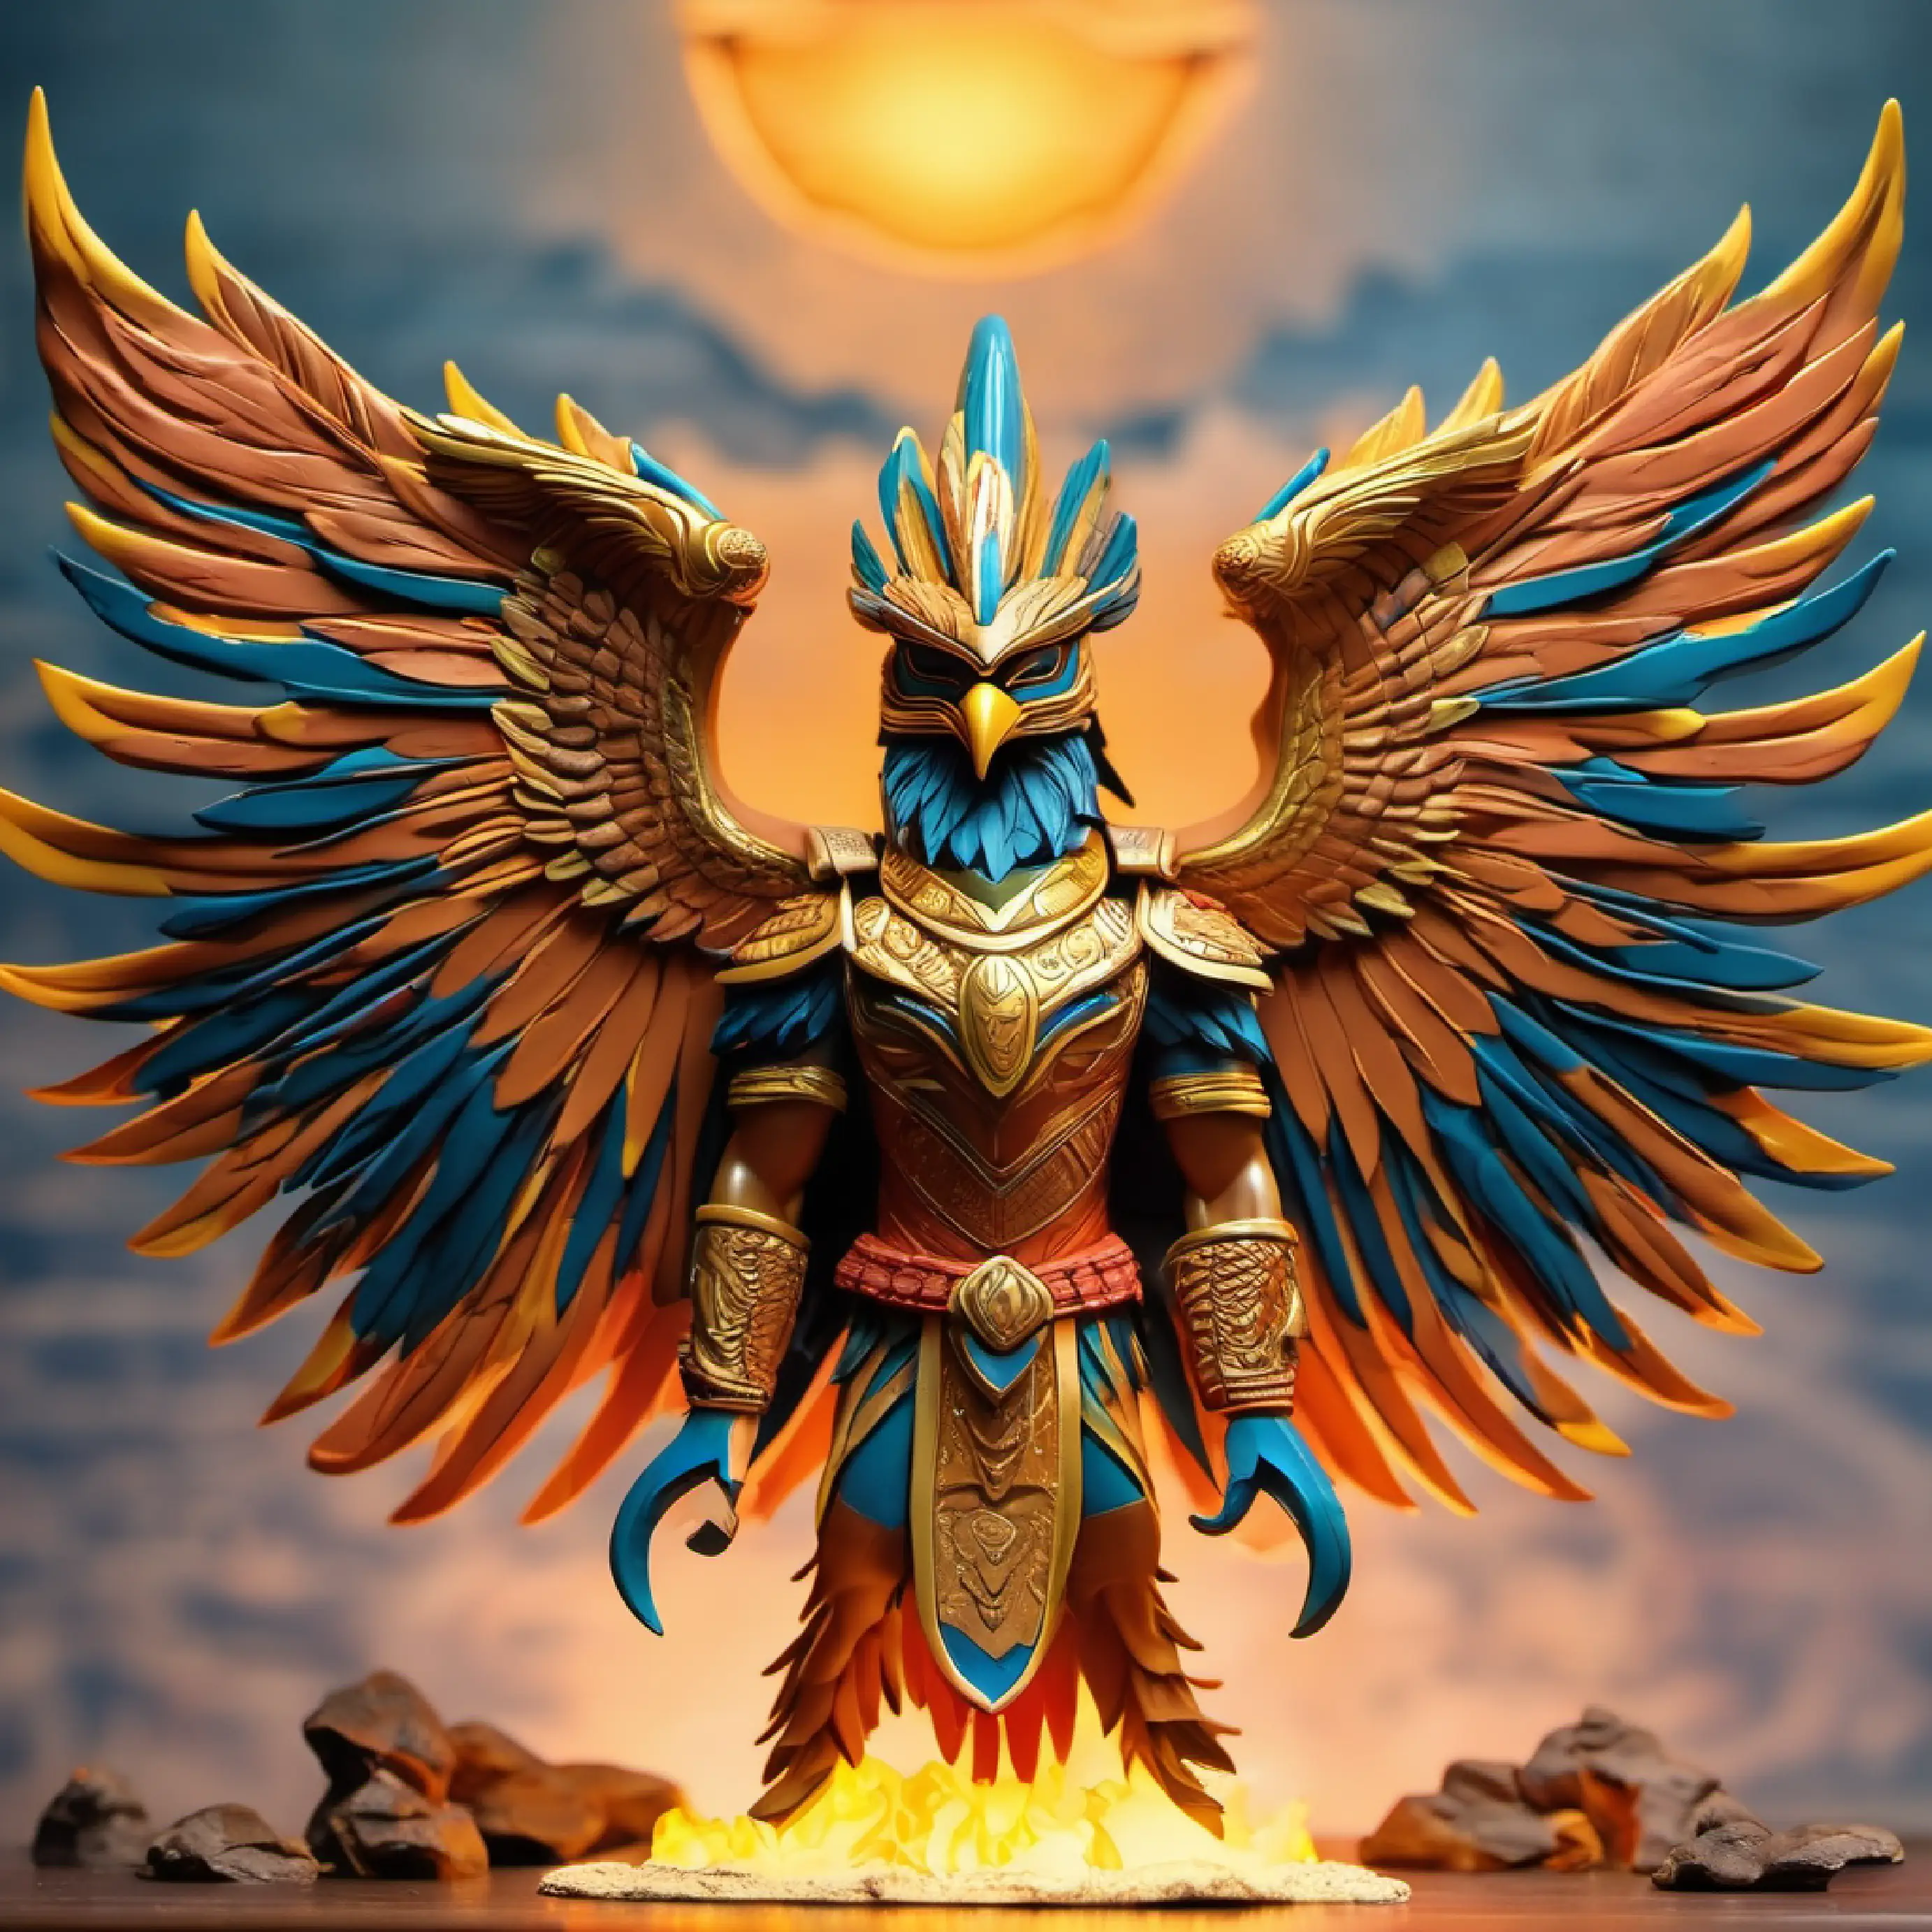 "Picture Garuda, fierce and resolute, his golden armor reflecting the fiery hues of the setting sun. His helmet, shaped like an eagle's head with eyes aglow, strikes fear into the hearts of his enemies. In the dense jungles of the mythical Naga realm, he engages in a titanic battle against the serpent kings, 